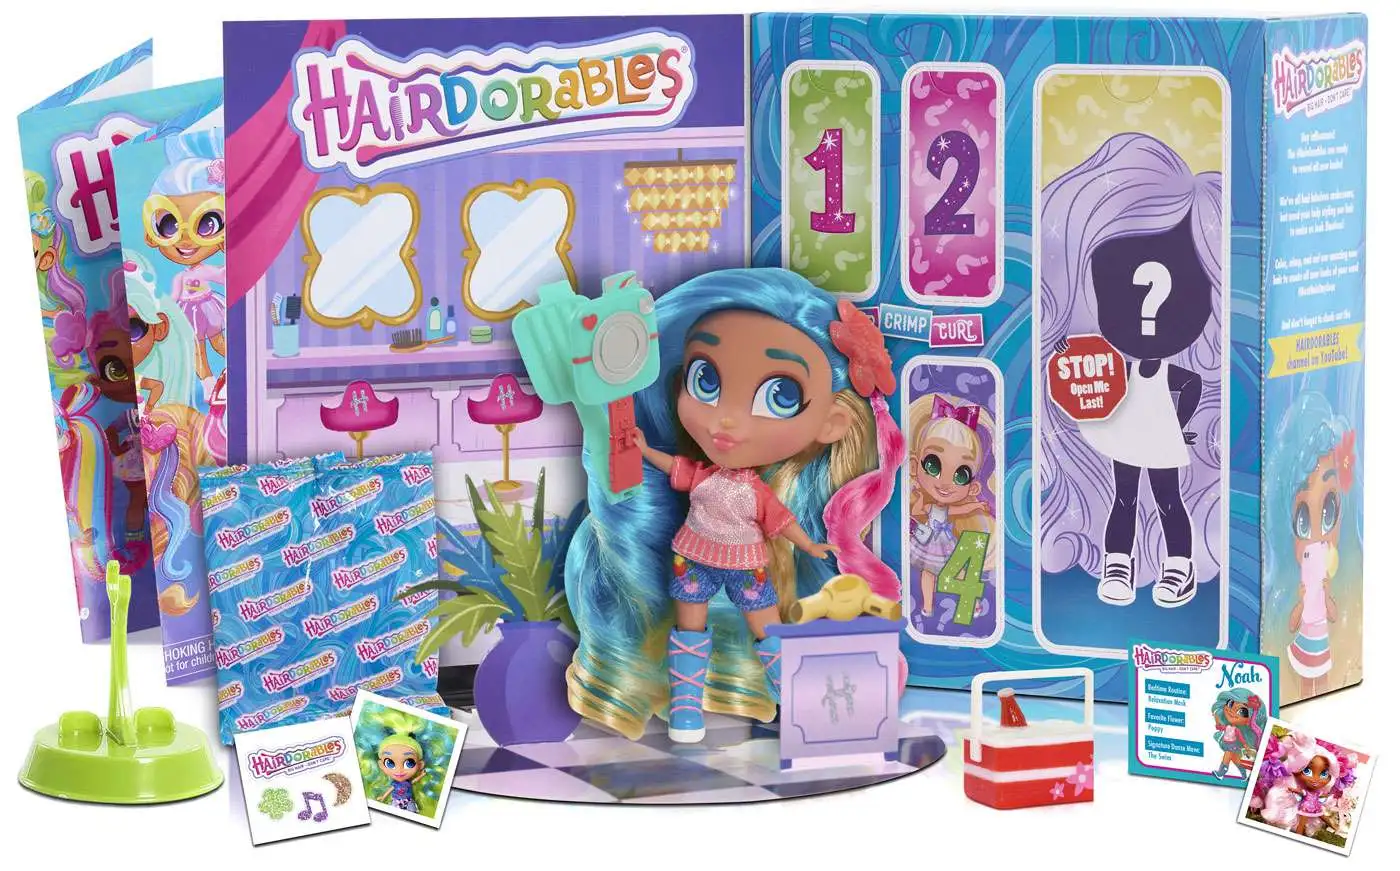 Hairdorables Hairdorables Surprise Doll Series 2 Contents Vary - Brand New 